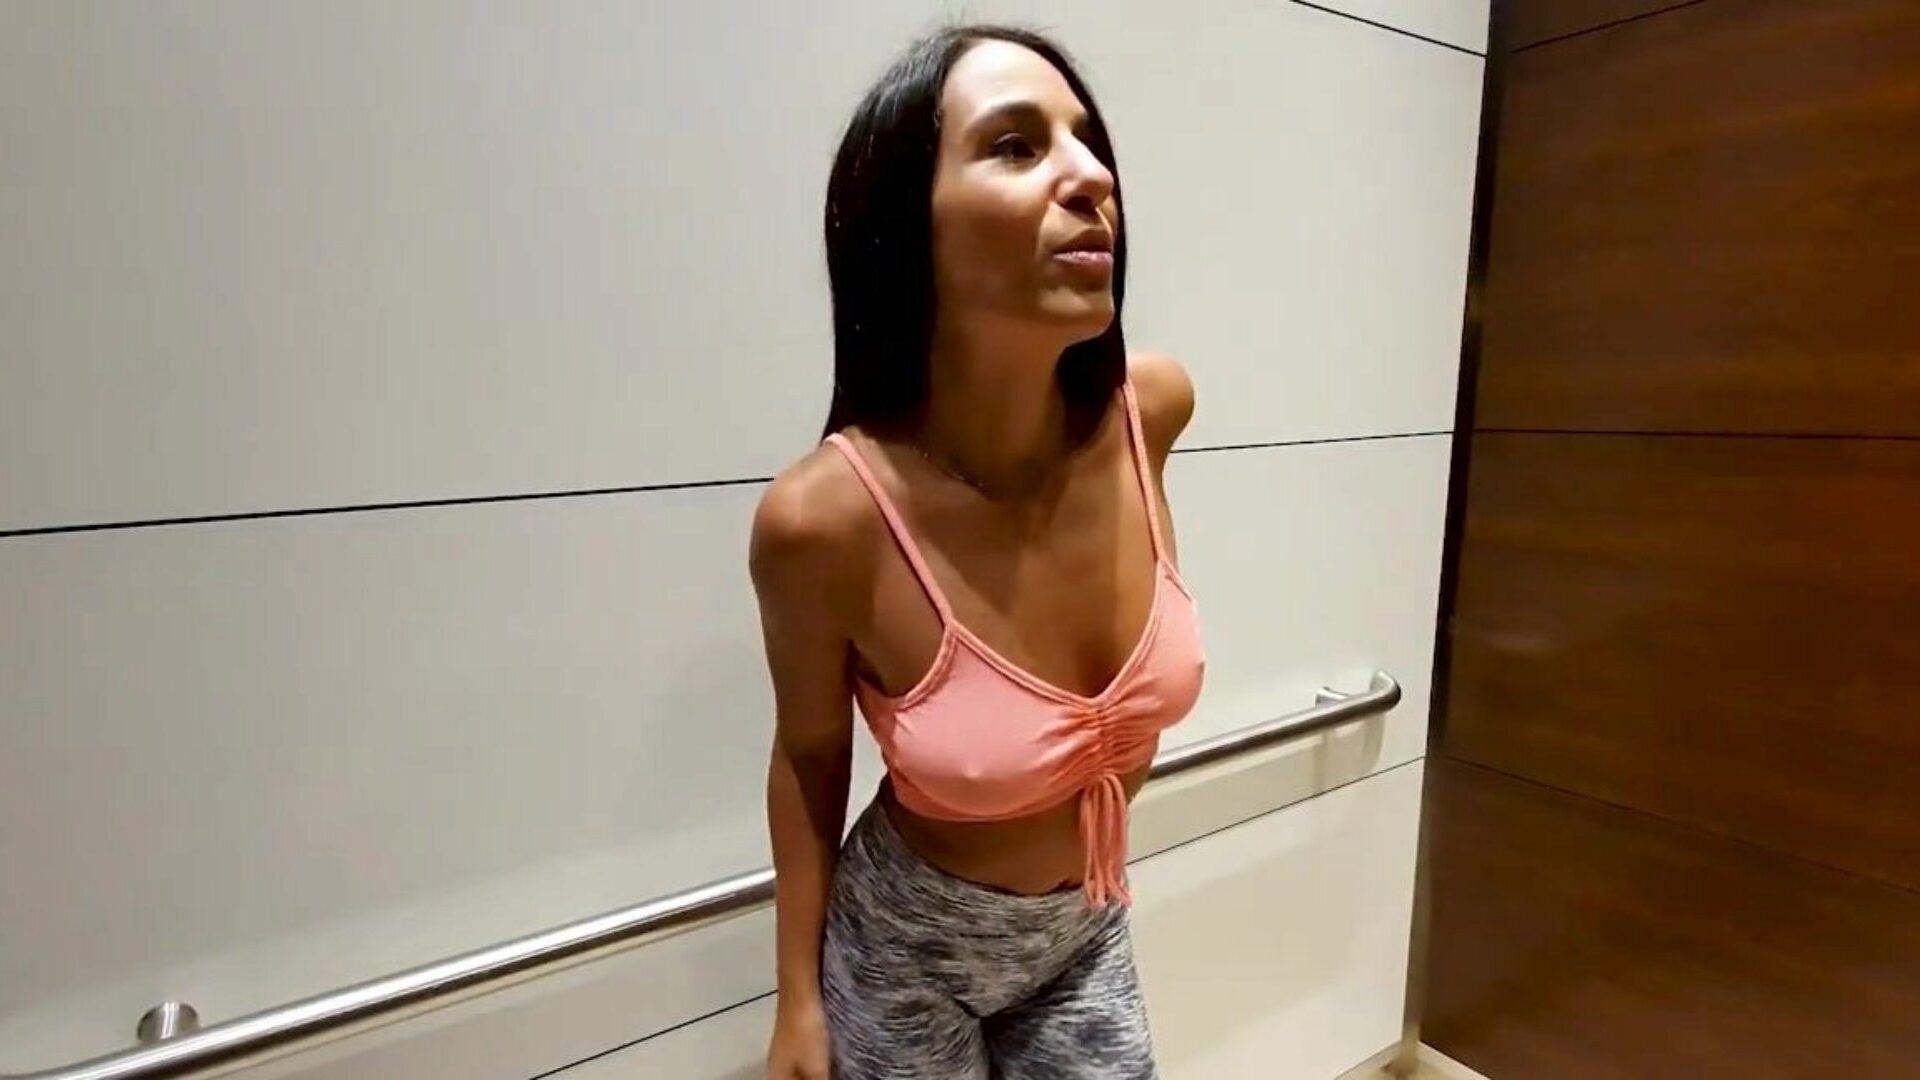 Hot in Hotel's elevator and she deepthroats it in the aisle - Naughty Danika!